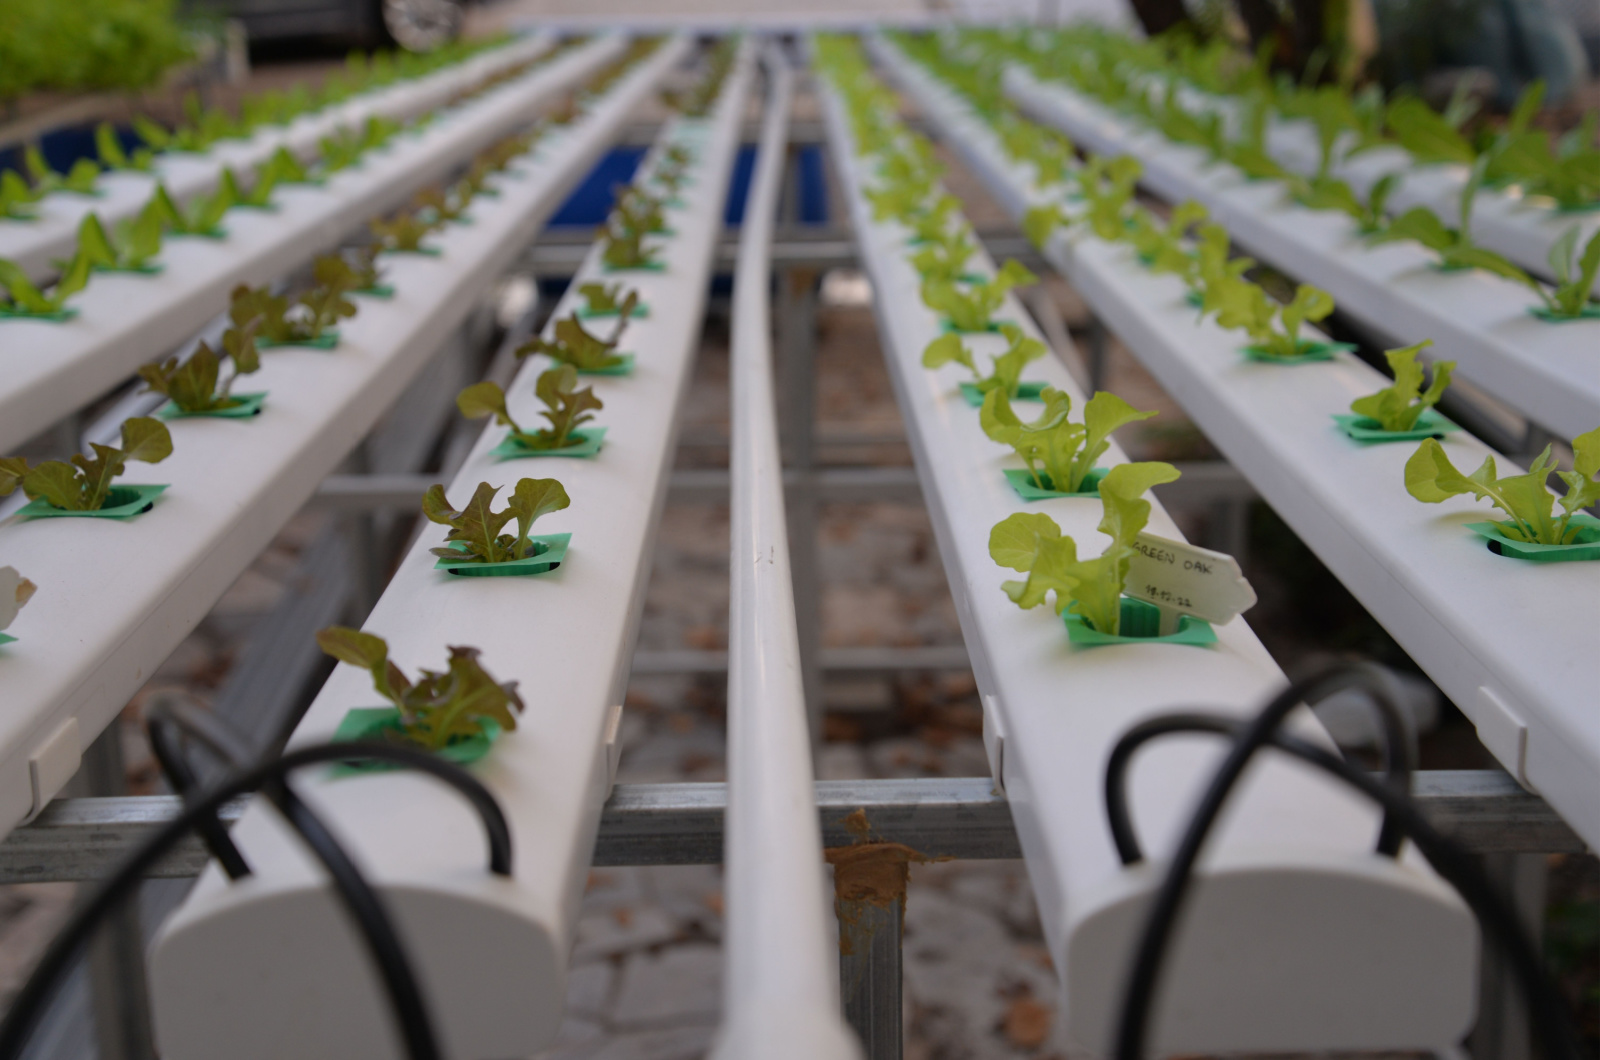 Multiple rows of Vegetables Grown in a Hydroponic Nutrient Film Technique